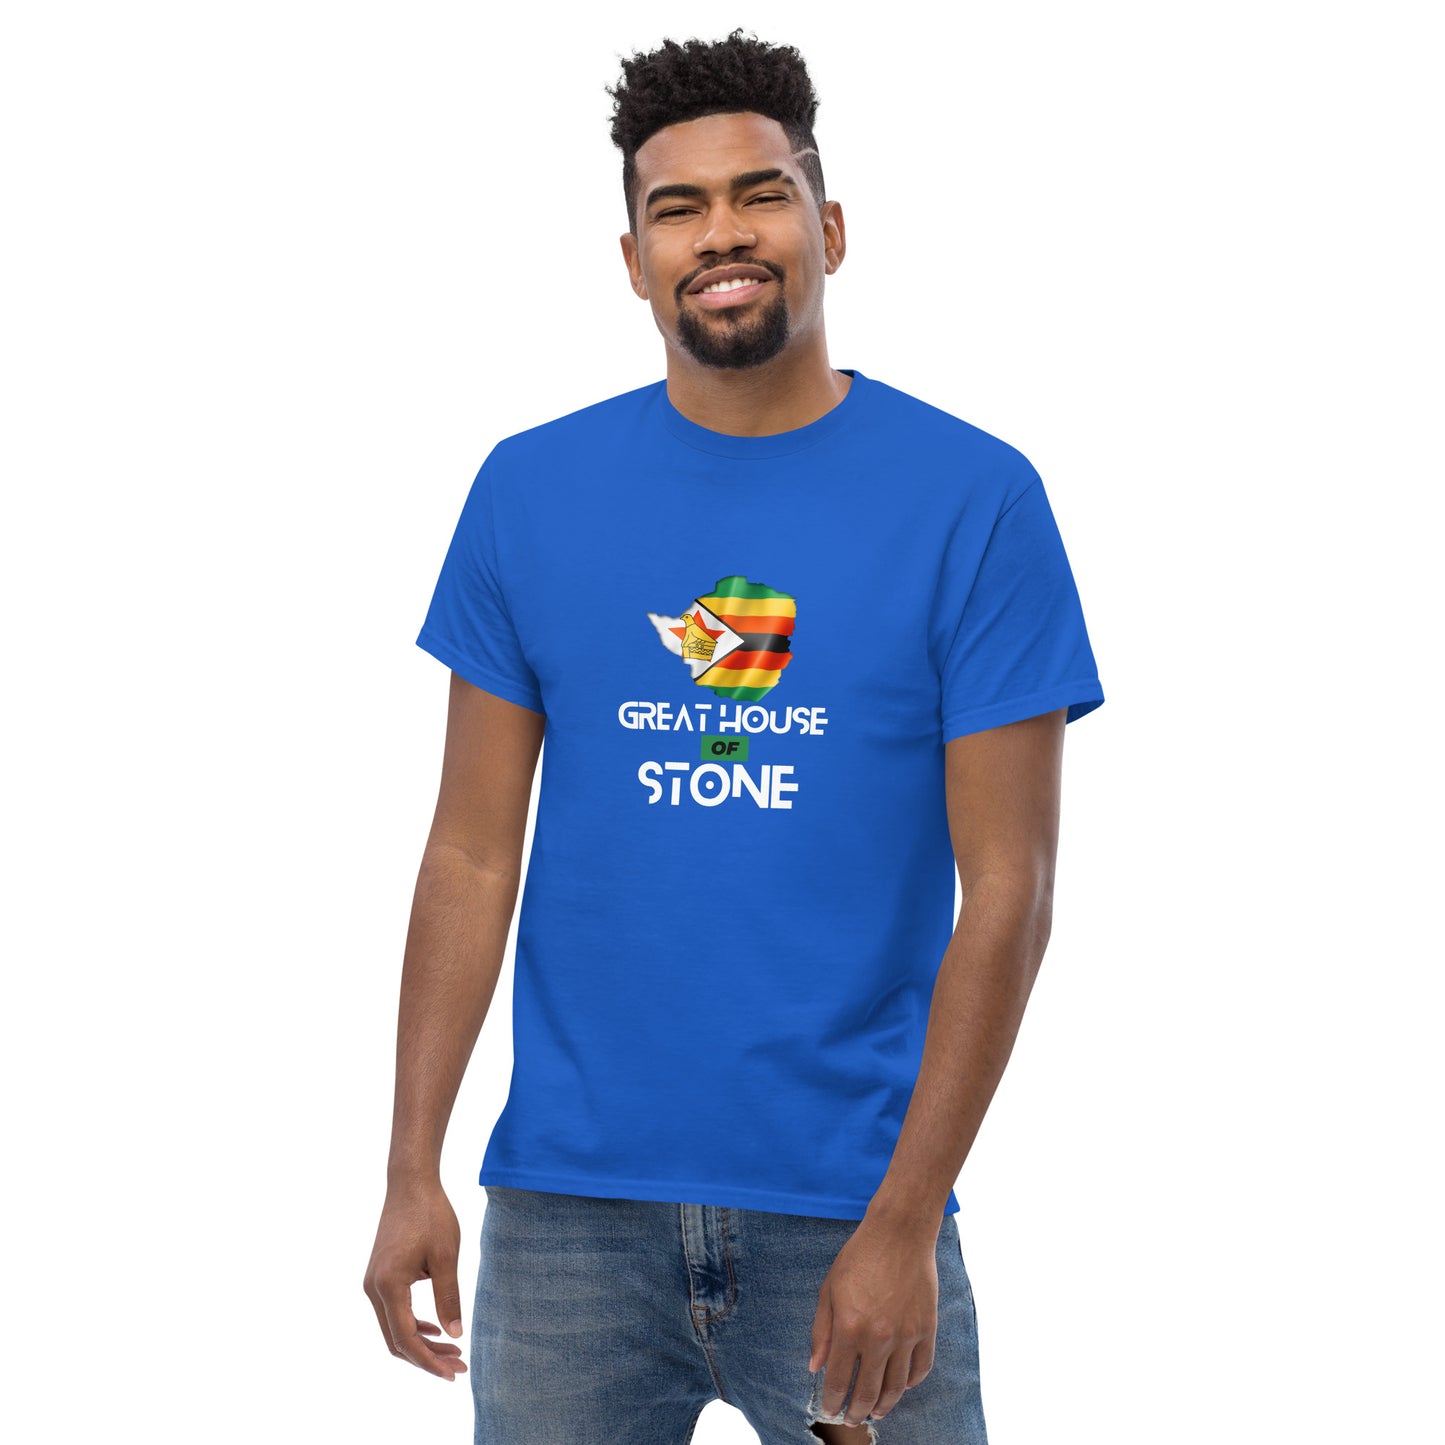 Men's classic Great House Of Stone T shirt